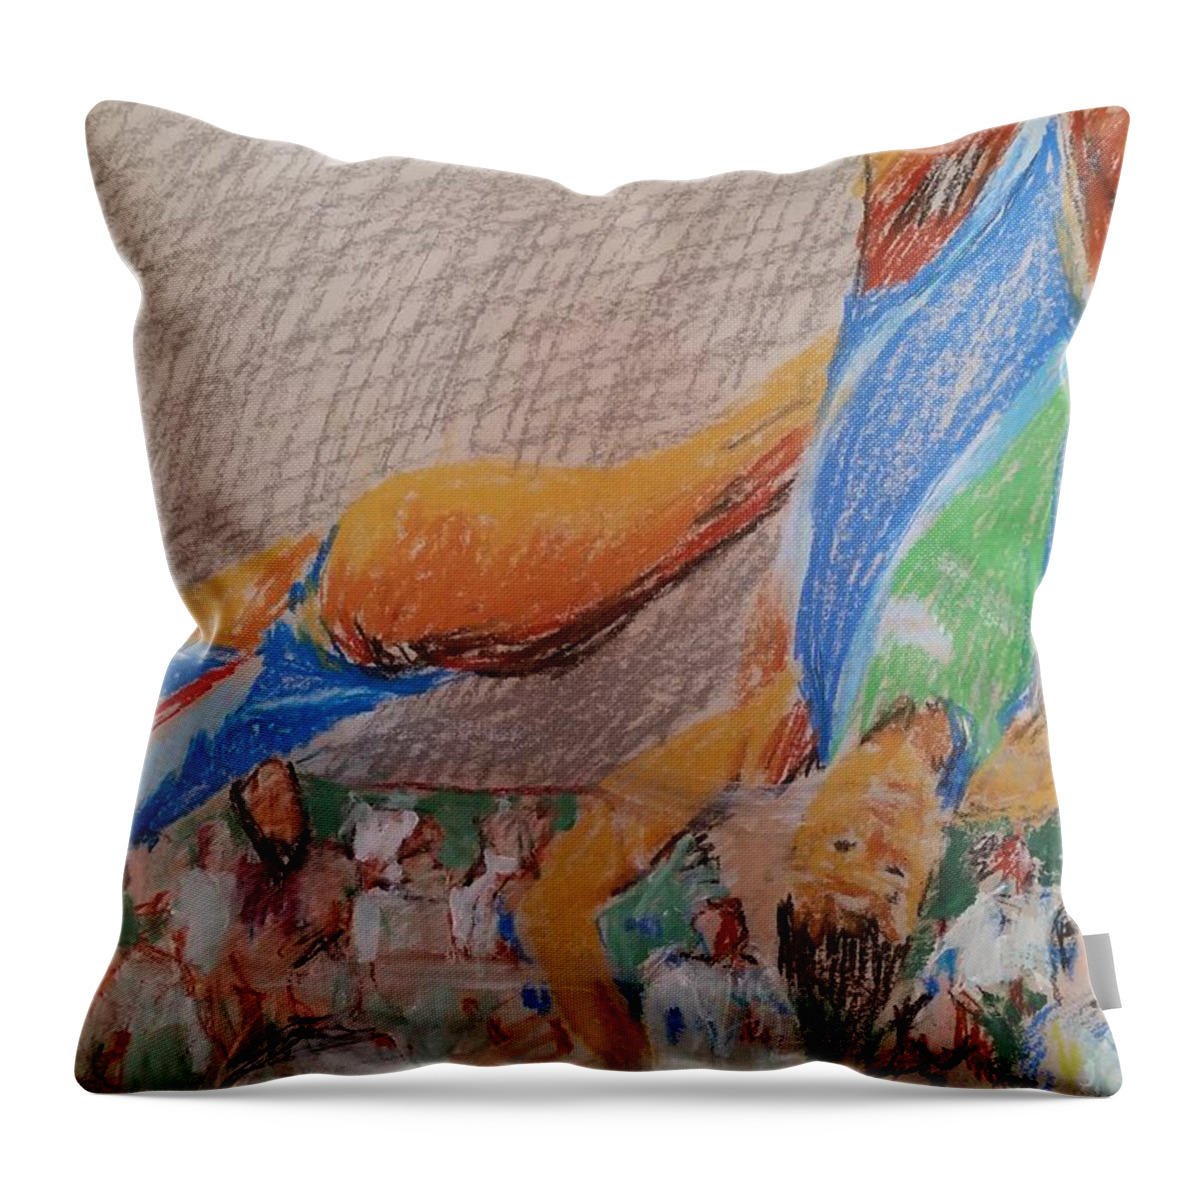 Platform Throw Pillow featuring the painting Diving IV by Bachmors Artist